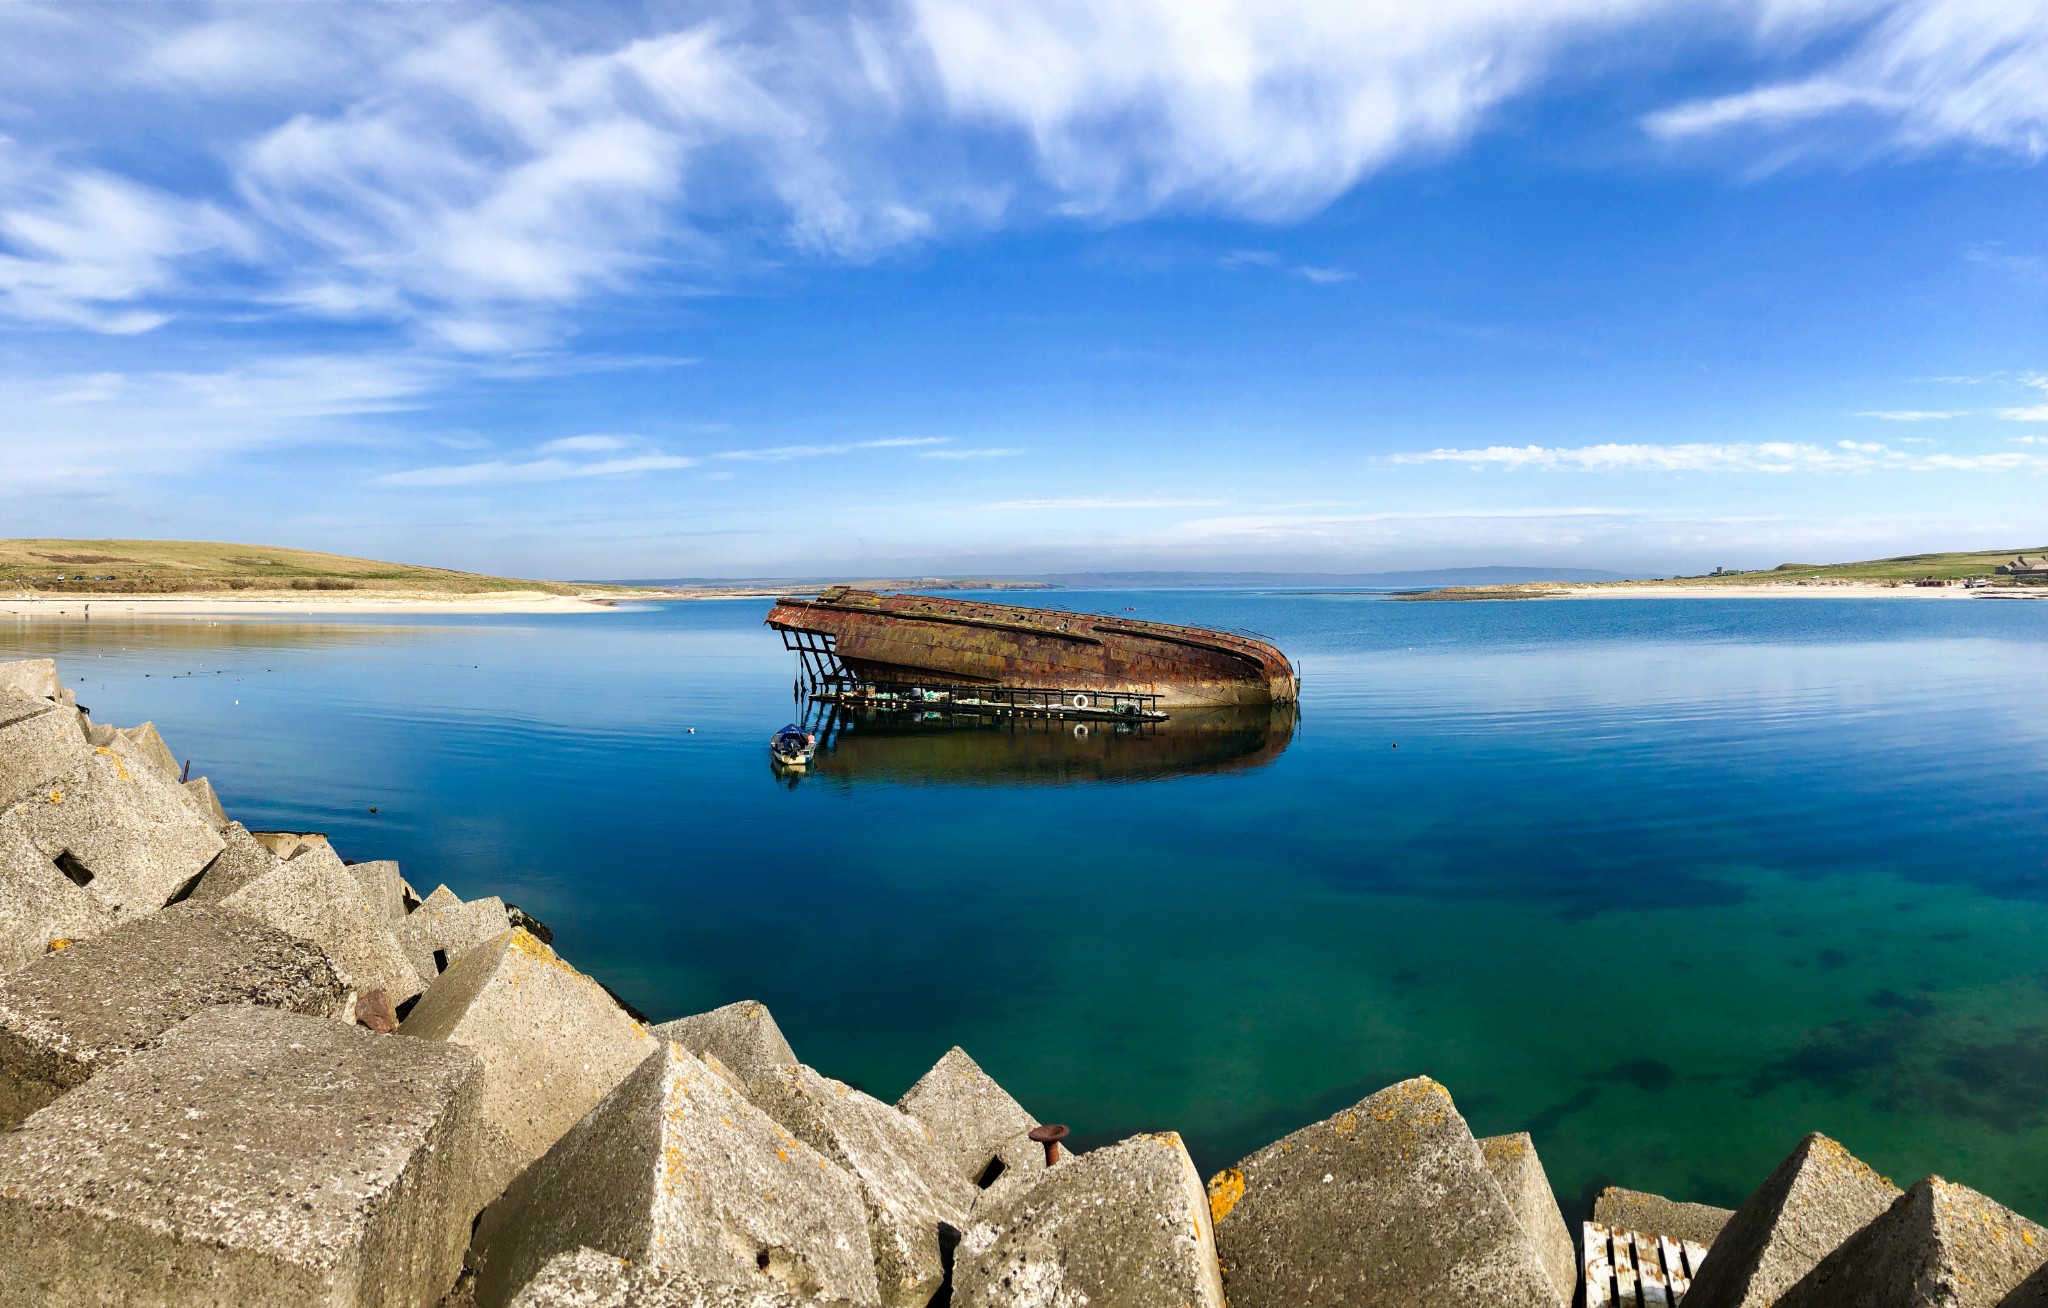 Wreck of 'Reginald', Churchill Barriers, Orkney - image by Laura Cogle